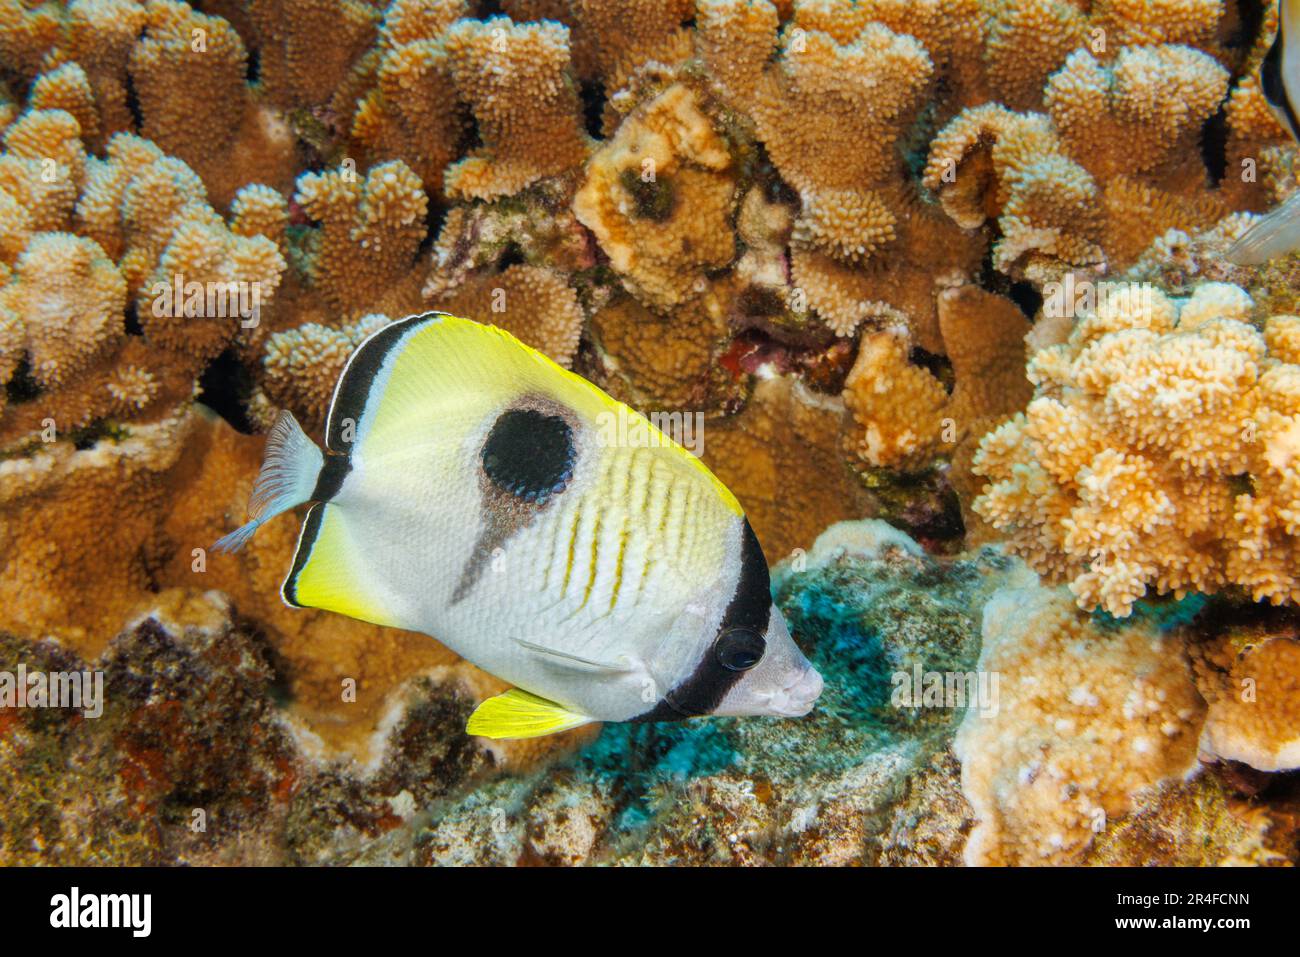 Teardrop butterflyfish, Chaetodon unimaculatus, feed mostly on encrusting rice coral as pictured here, Hawaii. Stock Photo